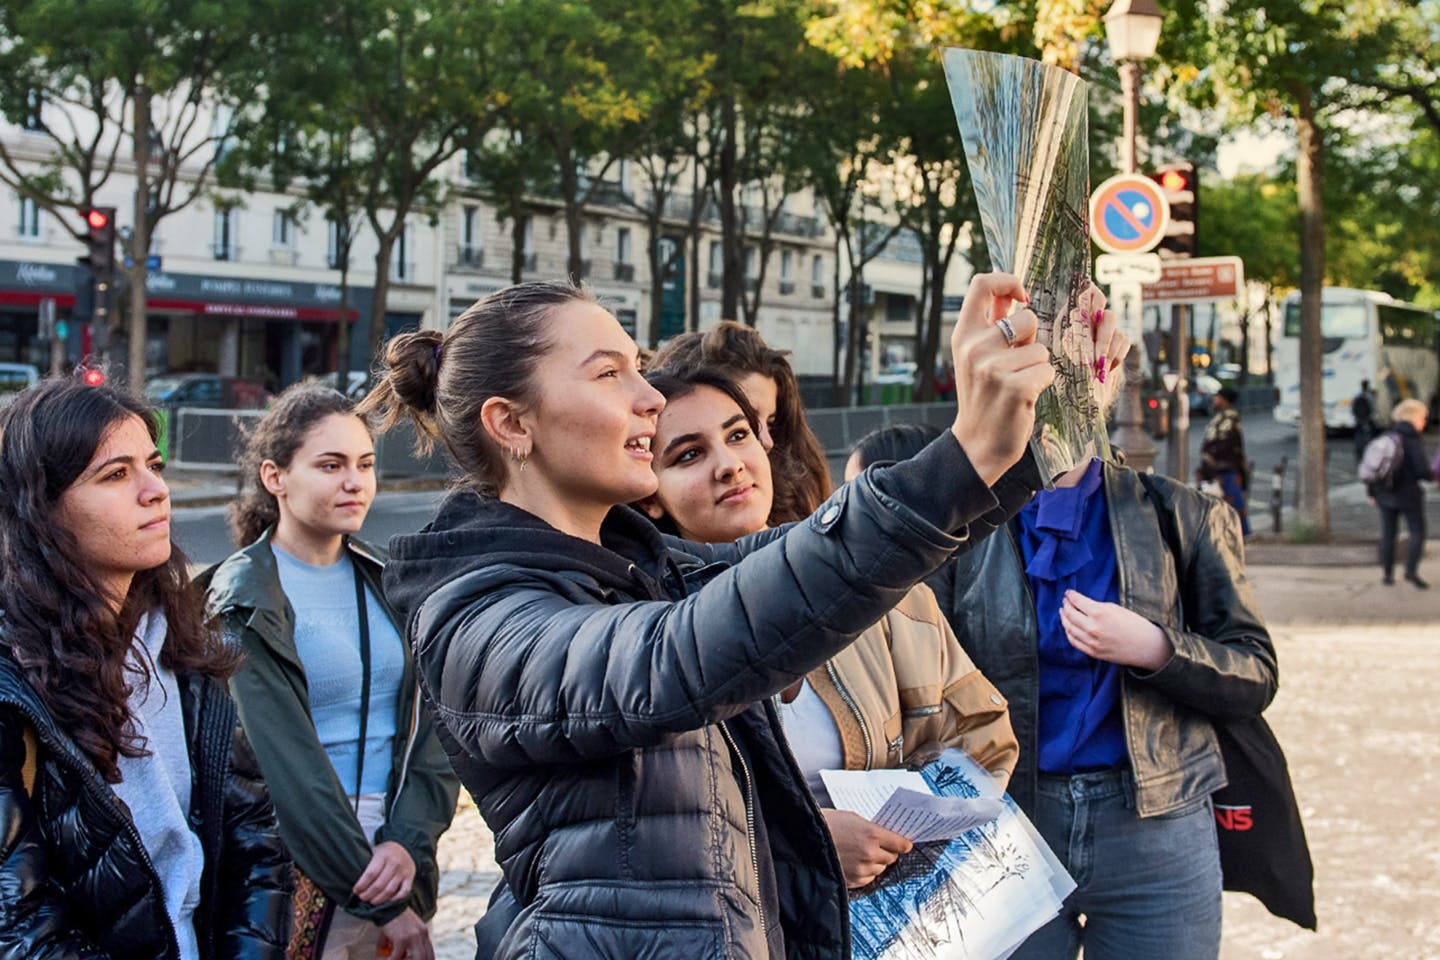 A group of students outside on the sidewalks of Paris, looking at art on a clear substrate, held up to the sun.